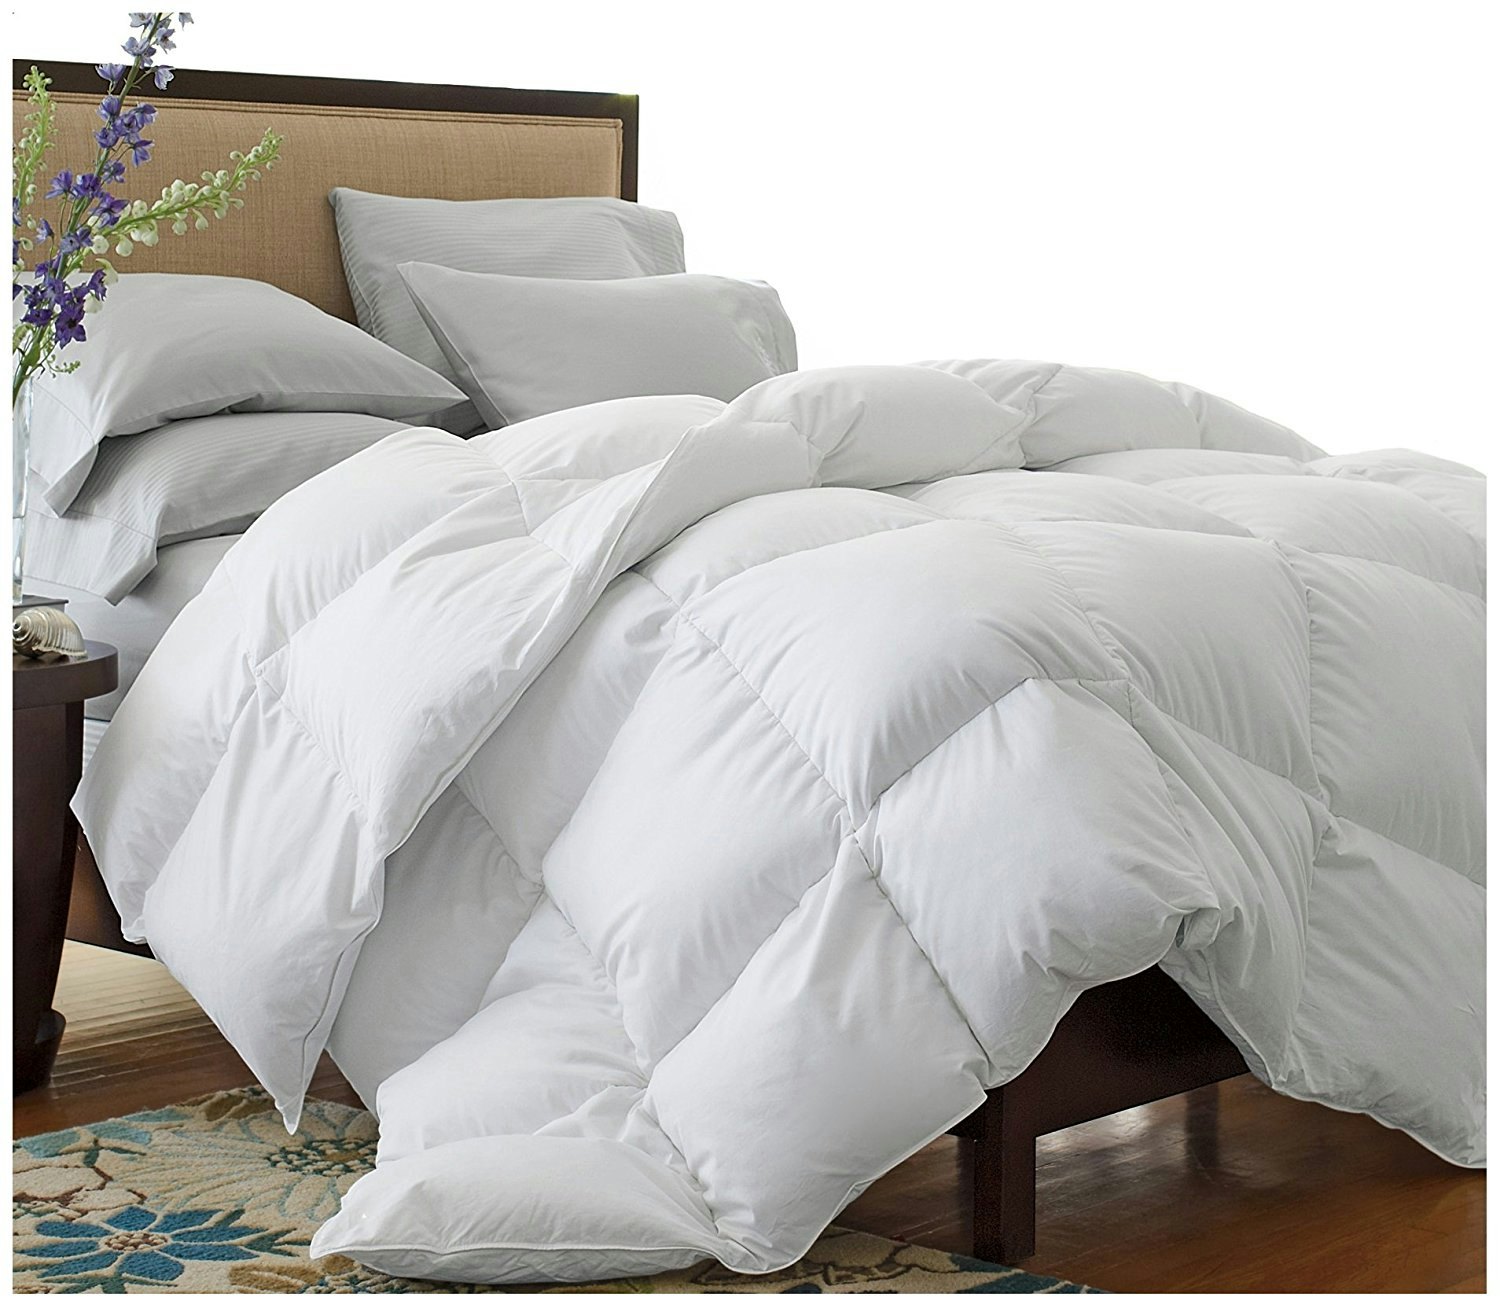 The 5 Warmest Comforters For Winter